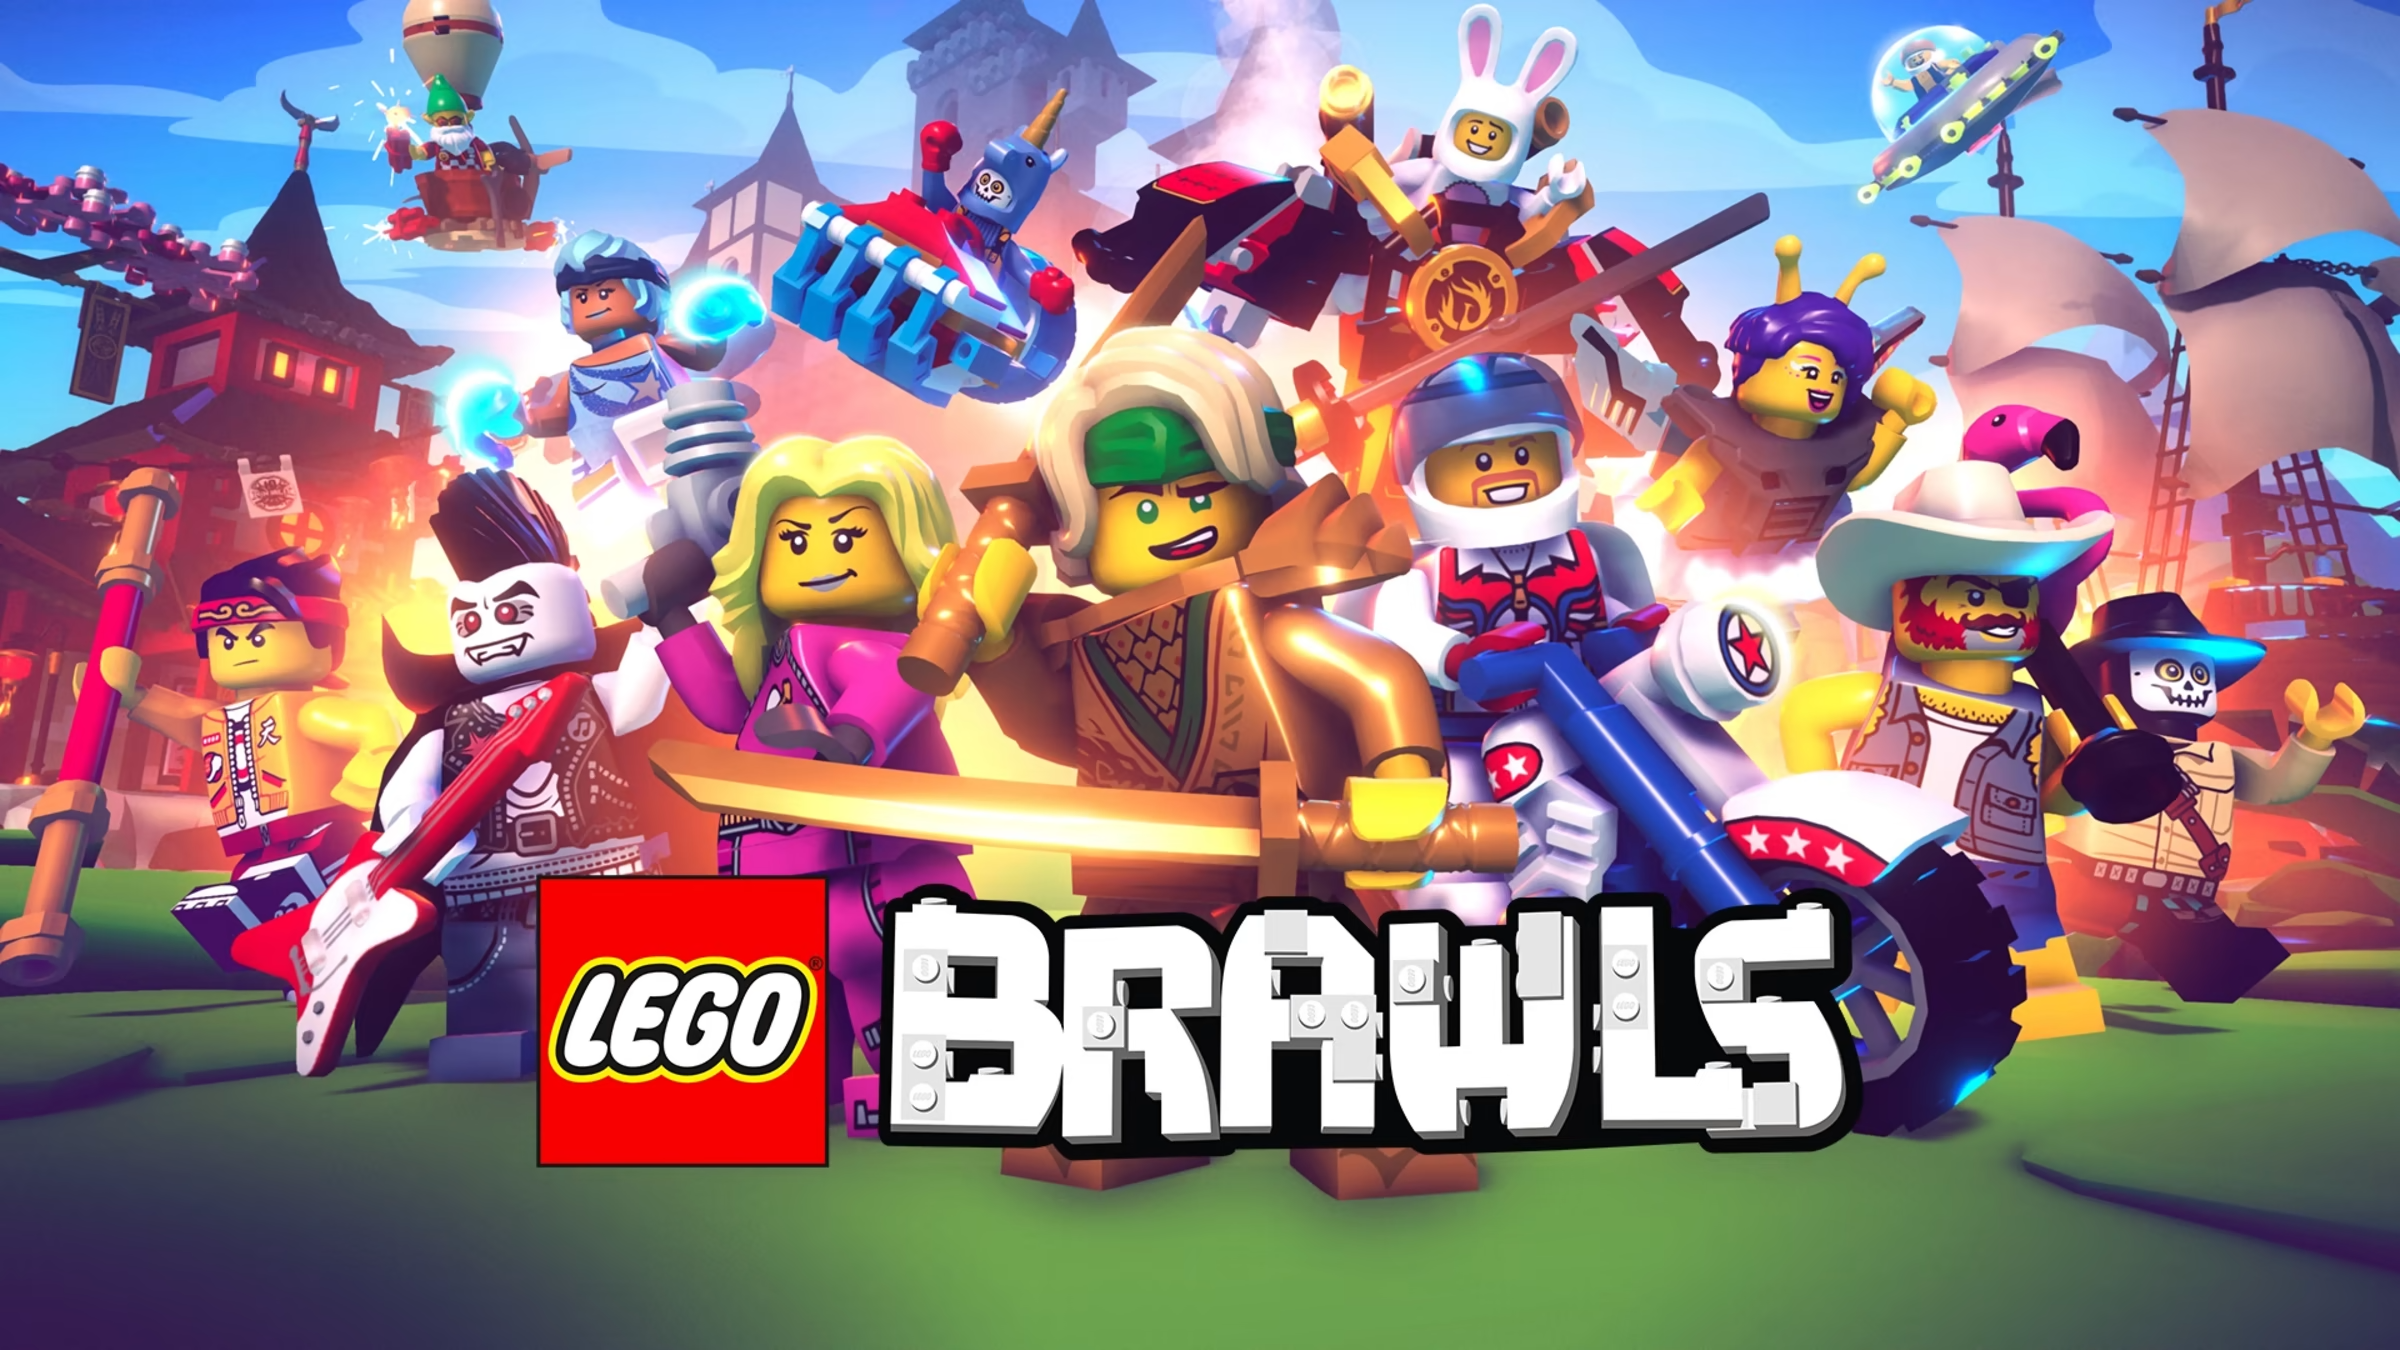 Compete in an Epic Battle for Glory in LEGO Brawls with the Base Race Game Mode and Castle Level Update